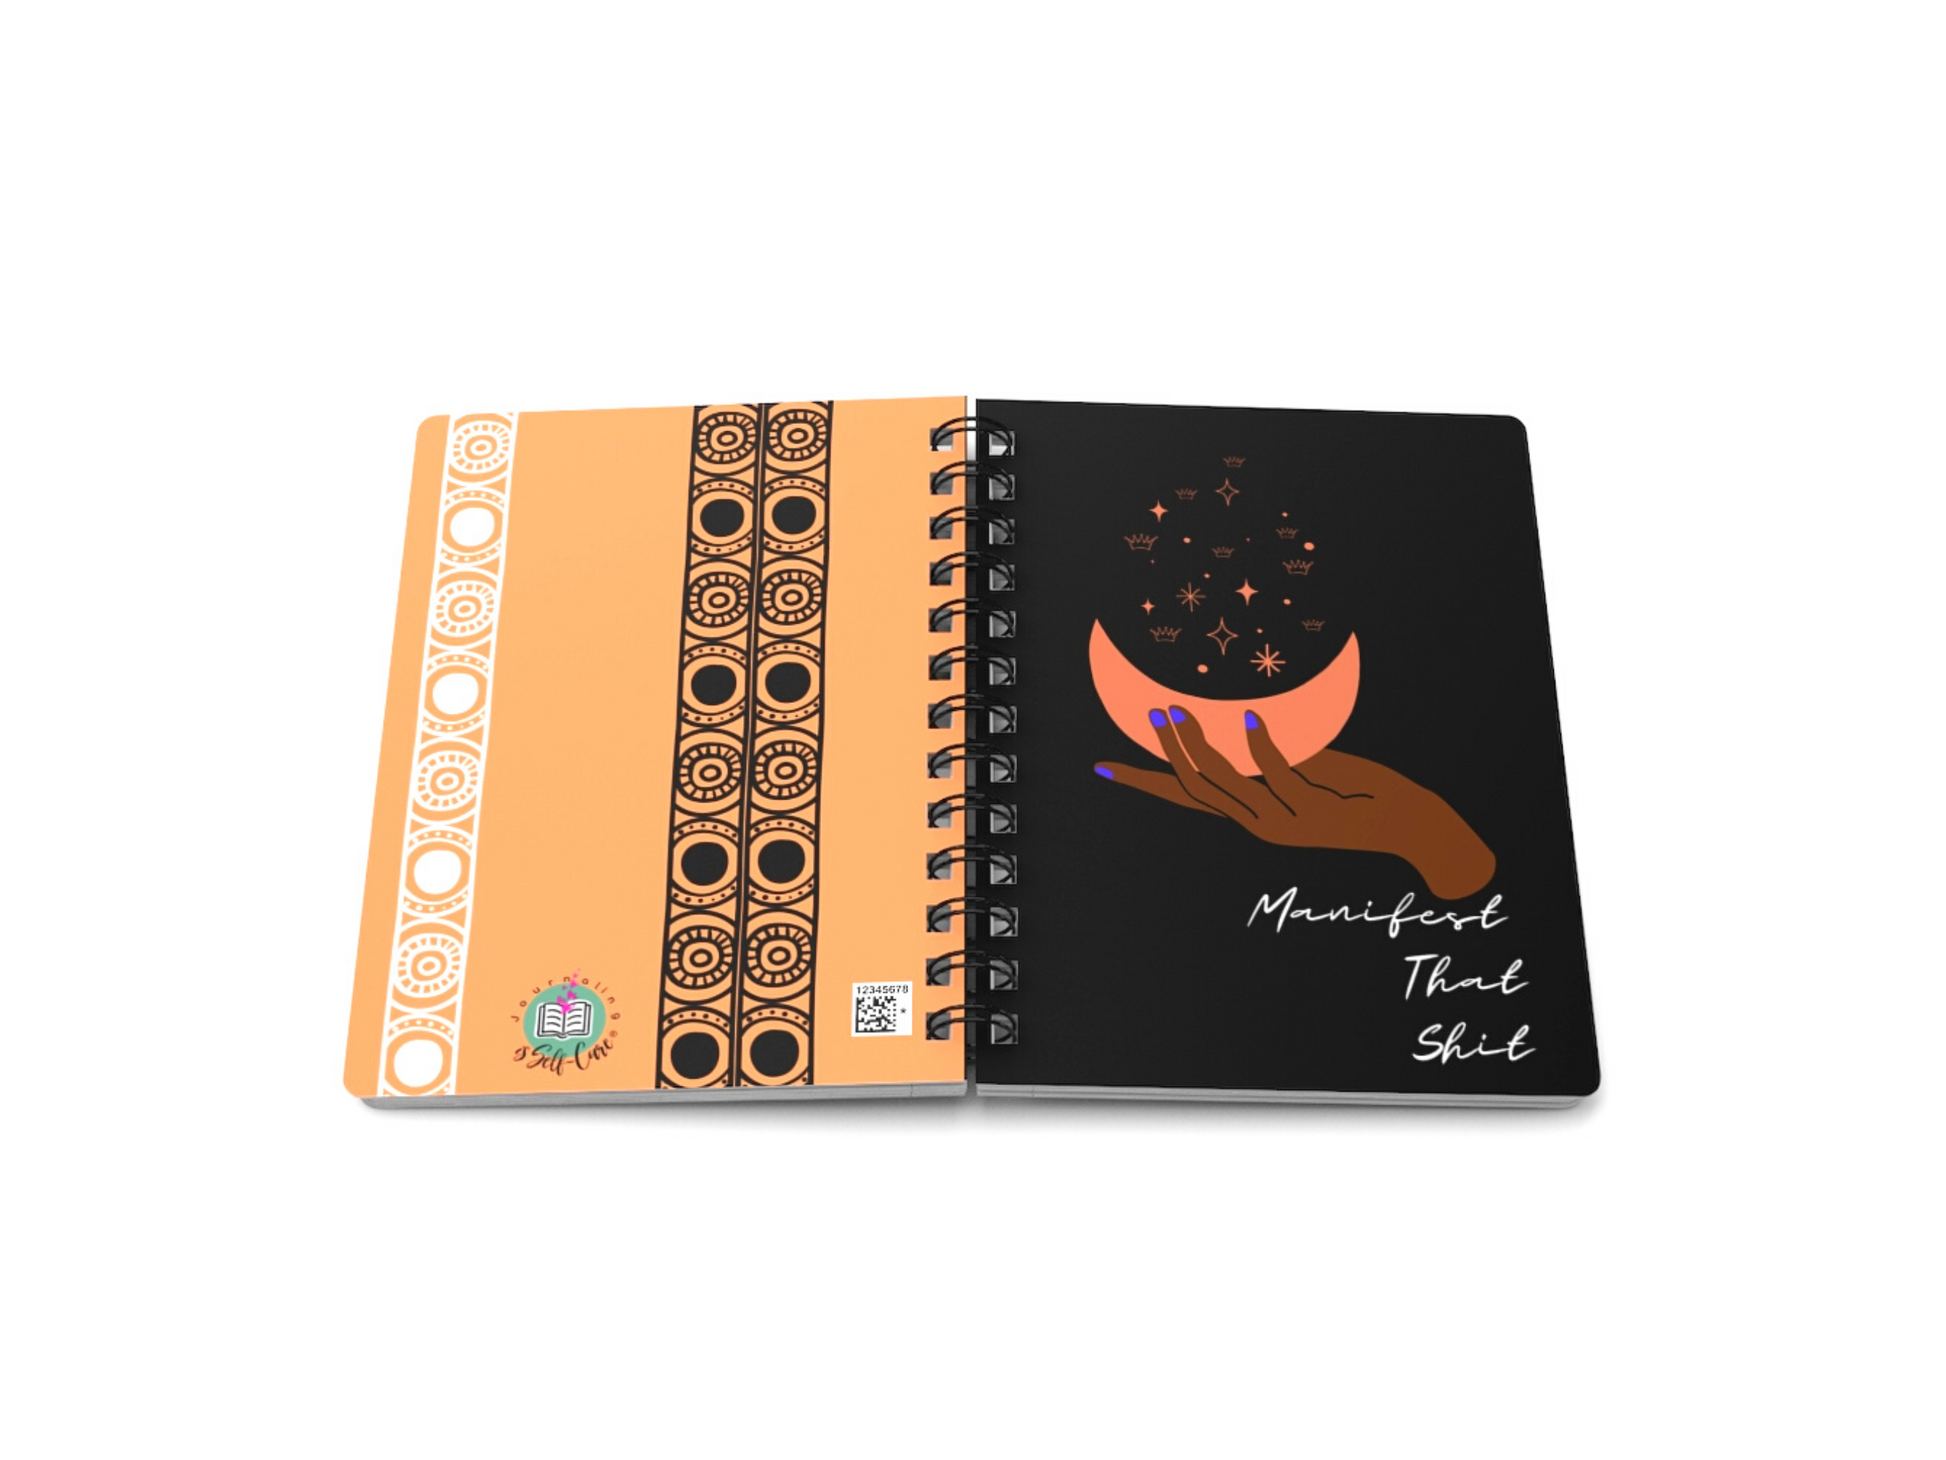 A "Manifest That Shit" Manifesting Journal to Access Your Inner Power with an image of a hand and a moon, perfect for manifesting journaling.